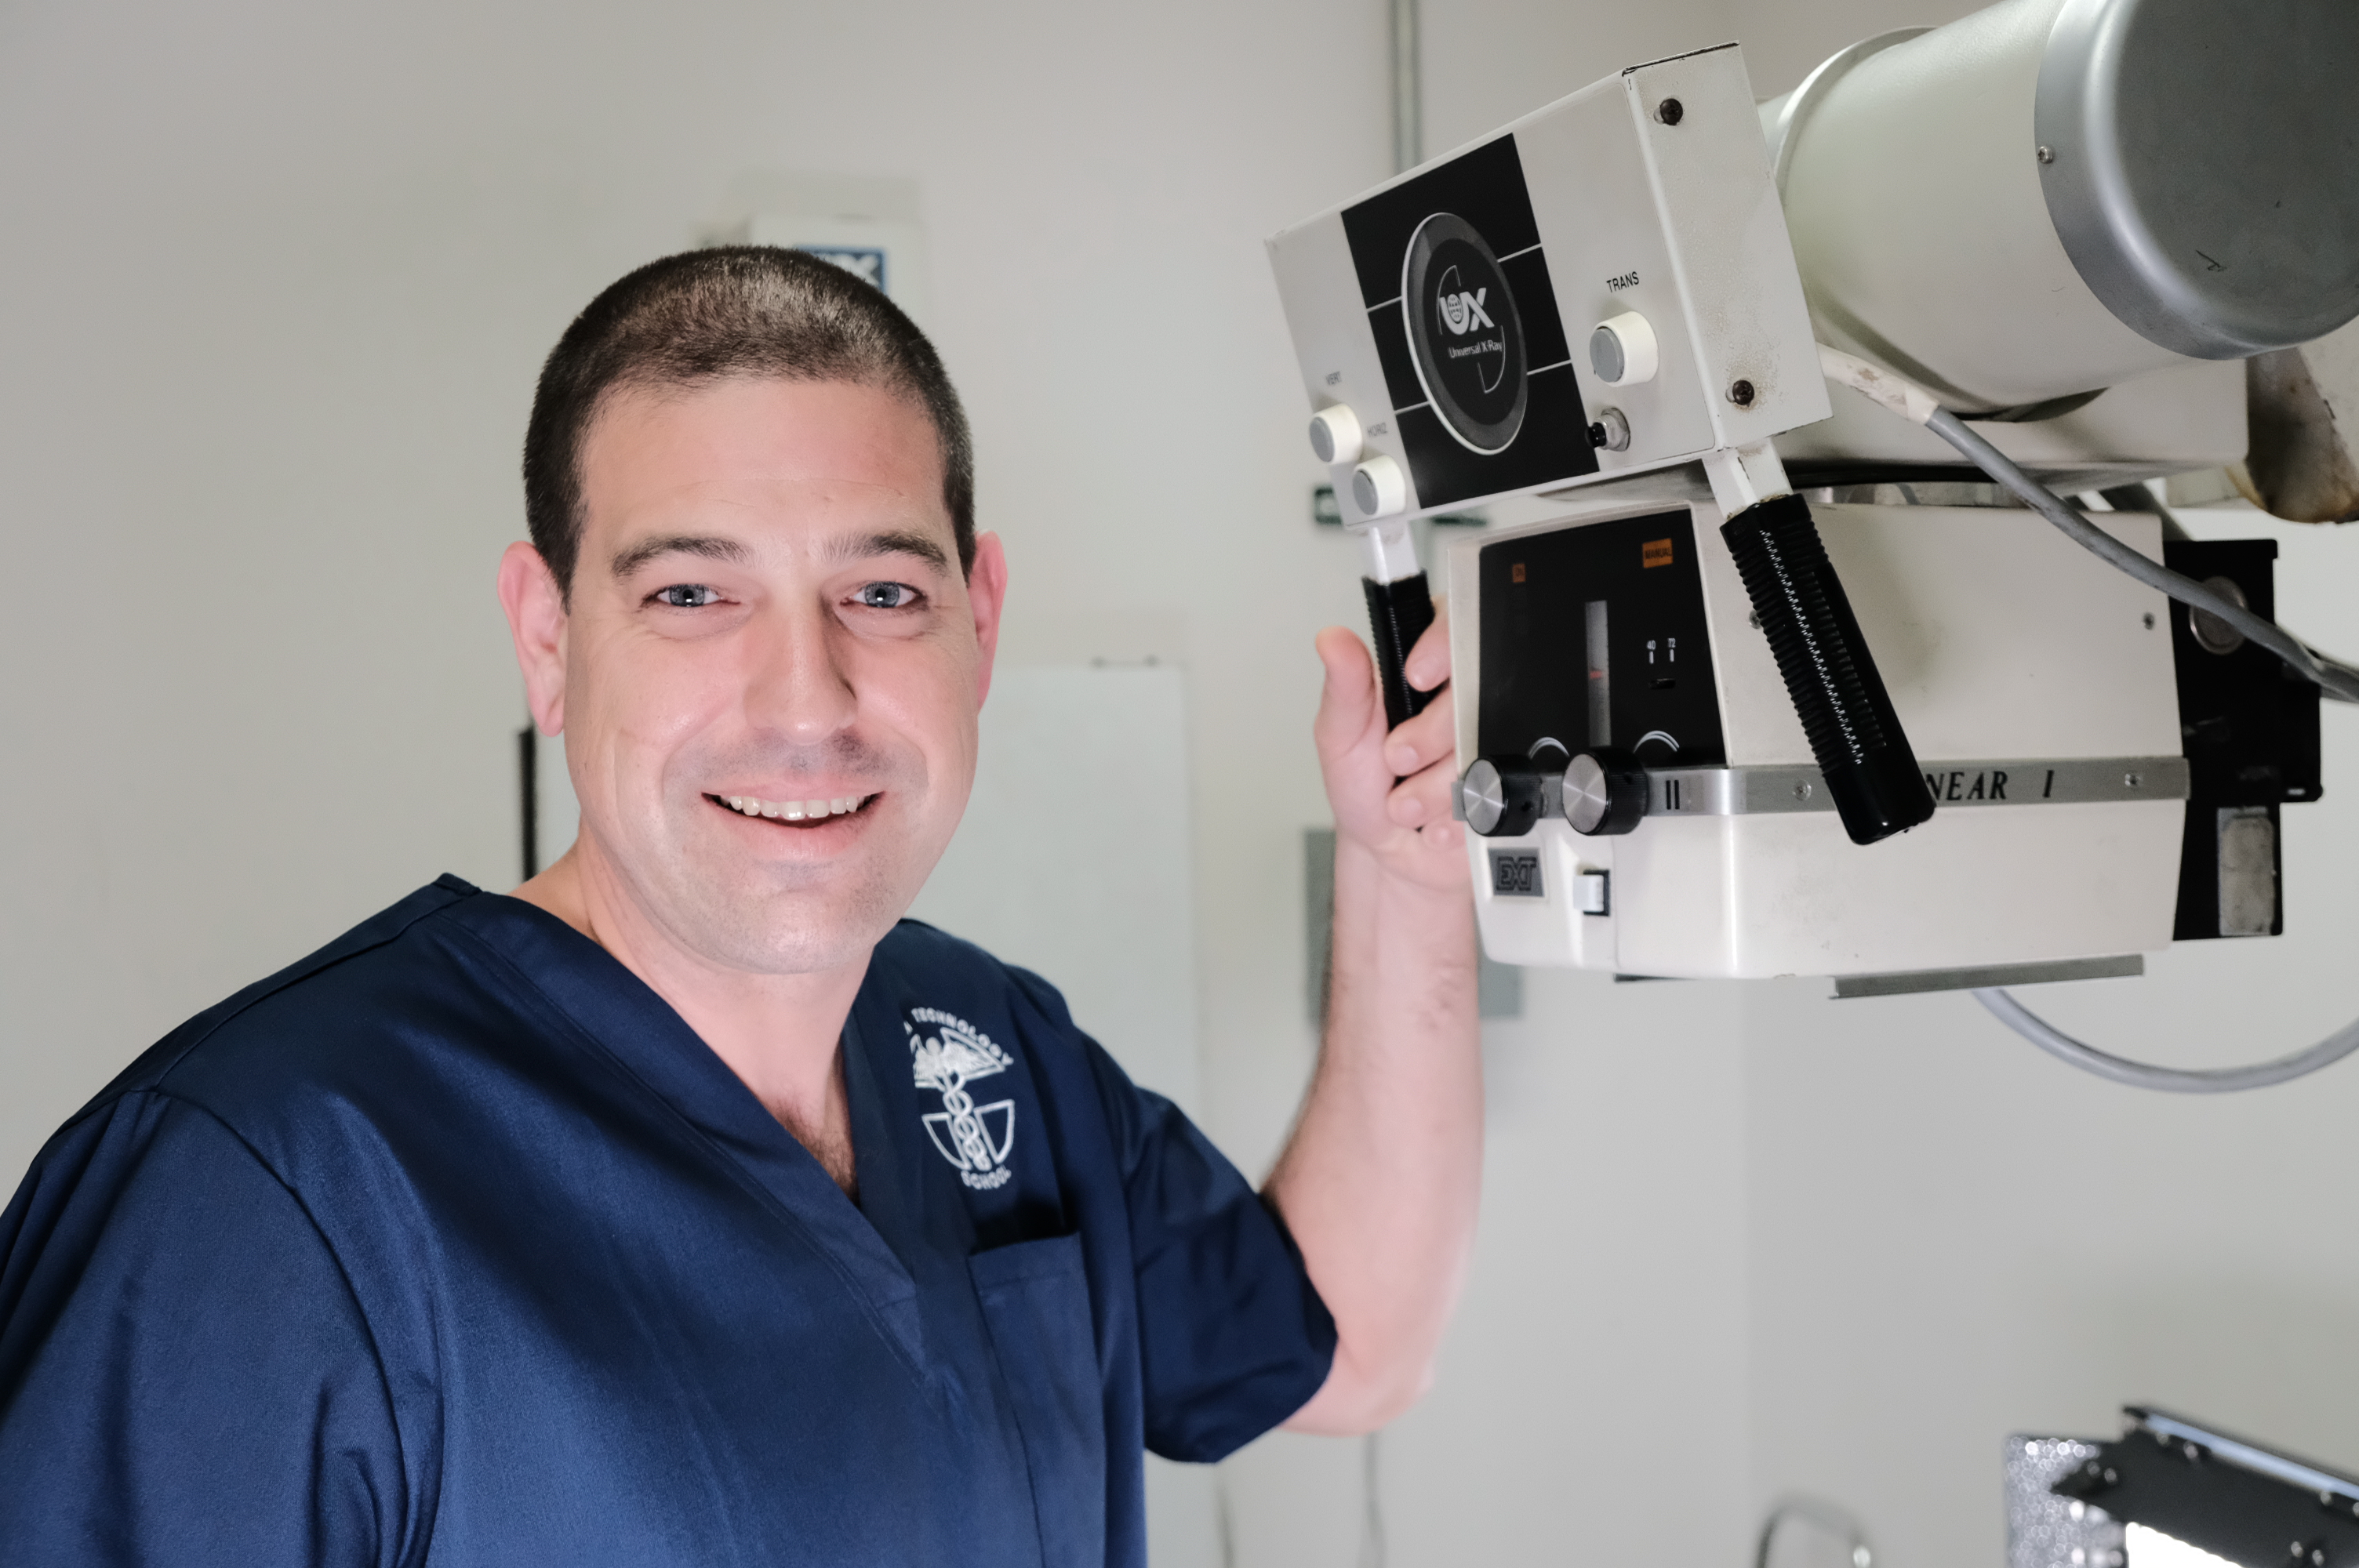 Adam Cooper, XT, is just one of our talented instructors in our X-ray Tech class in Orange County